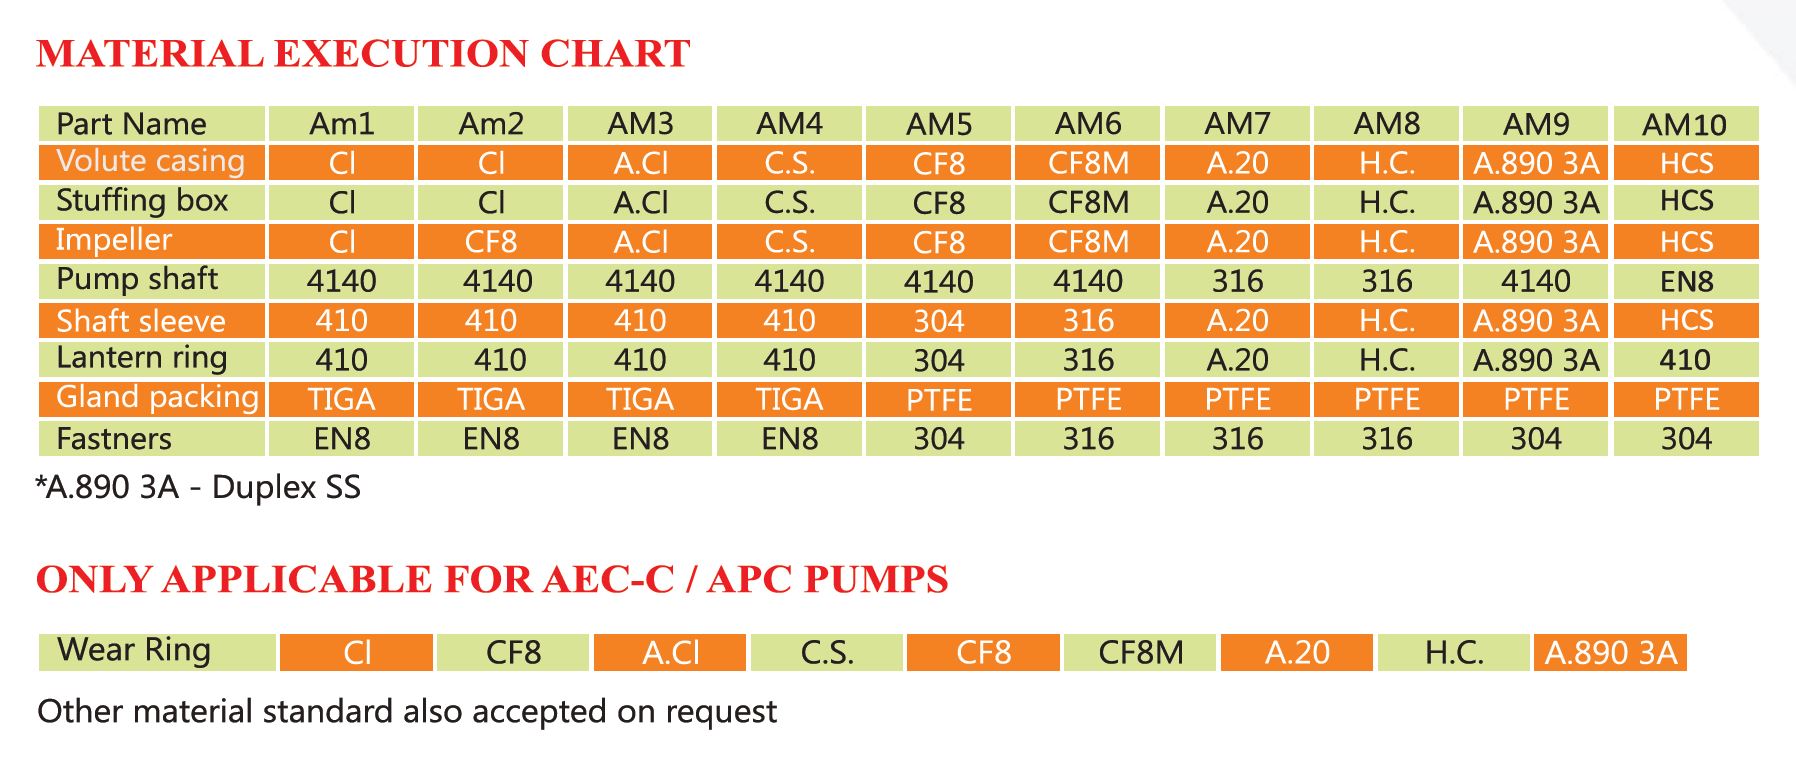 Material execution chart for all pumps